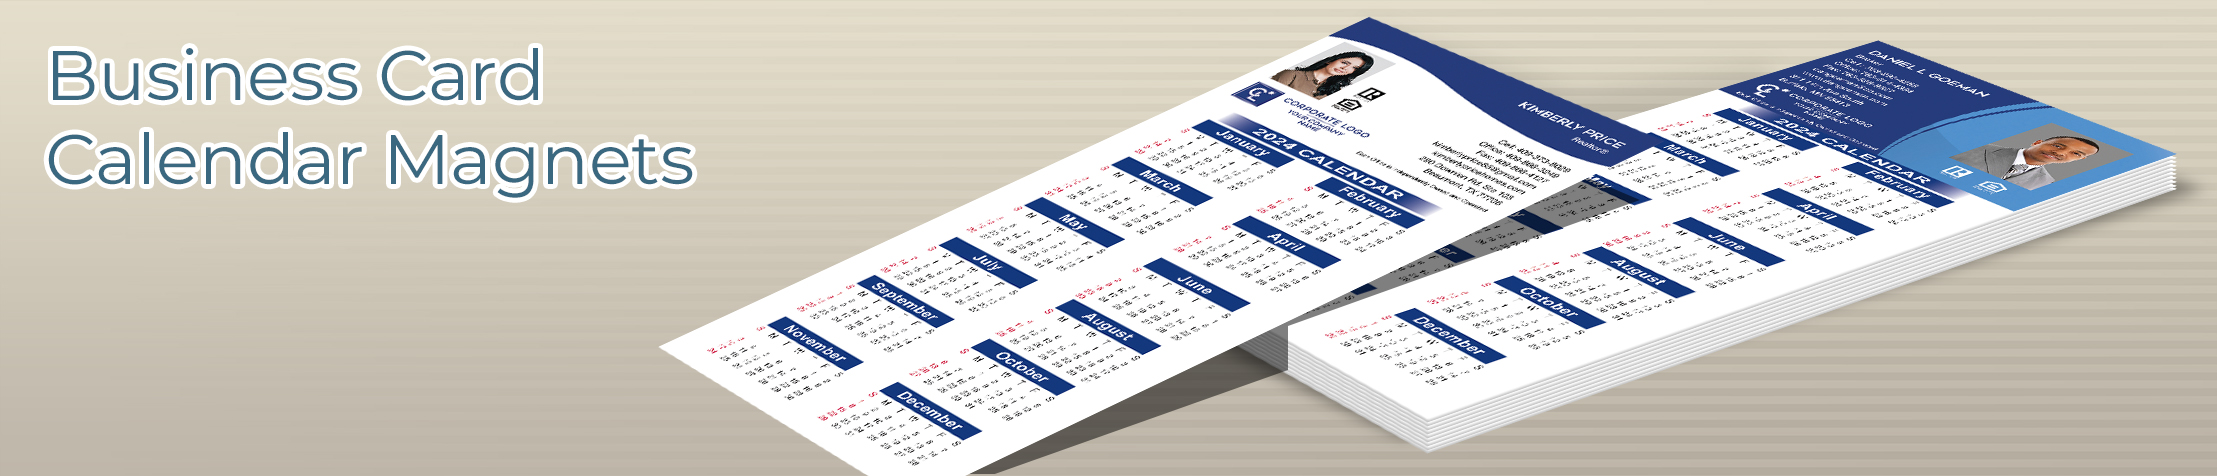 Coldwell Banker Real Estate Business Card Calendar Magnets - Coldwell Banker  2019 calendars with photo and contact info | BestPrintBuy.com